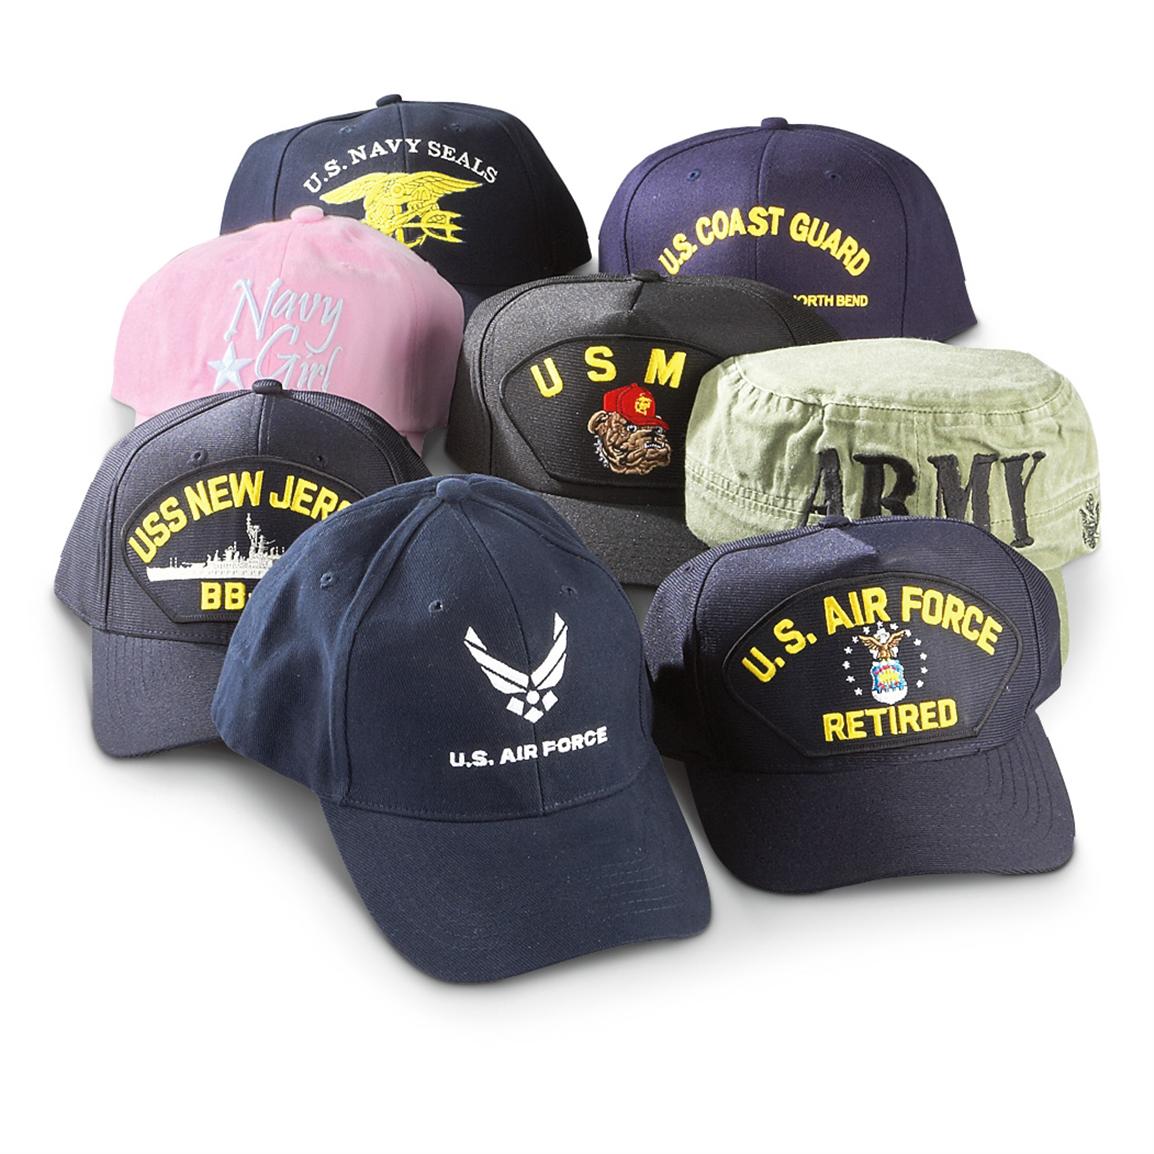 8 Pk. of Military Ball Caps 222003, Hats & Caps at Sportsman's Guide